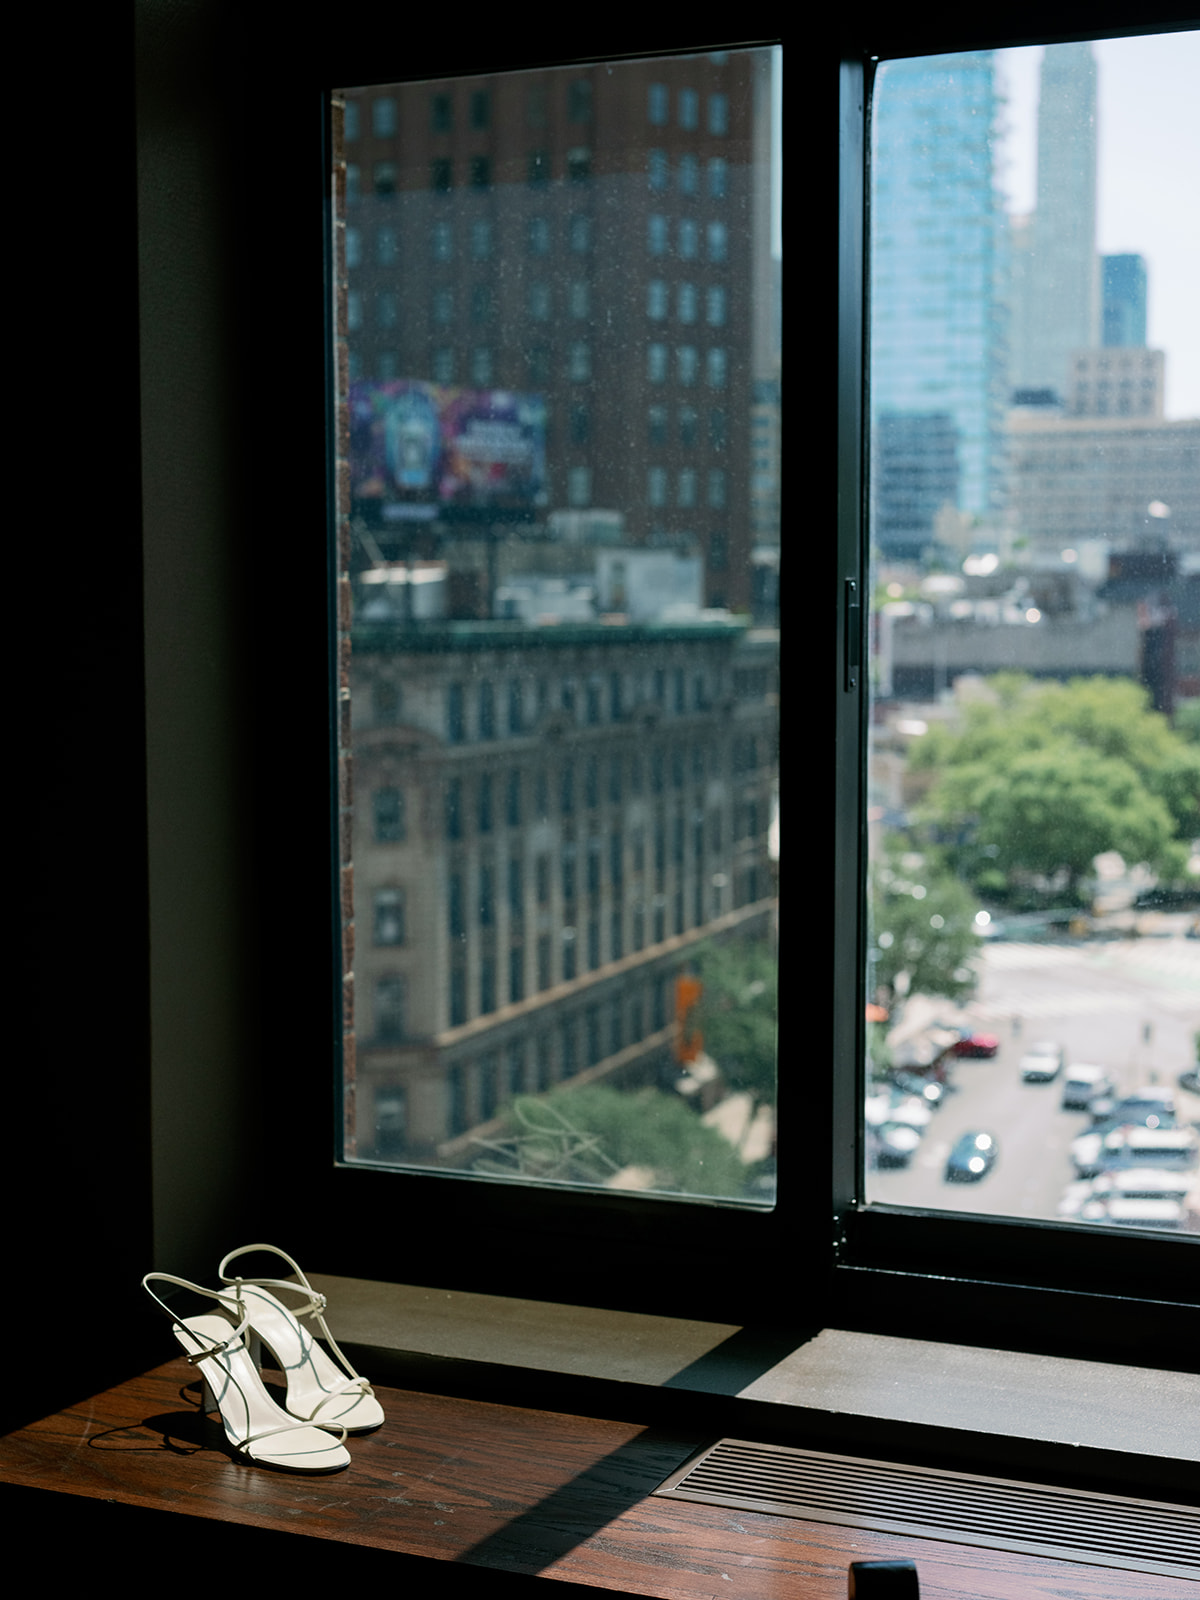 City views frame elegant white bridal shoes on a window sill, capturing the essence of a New York wedding moment.